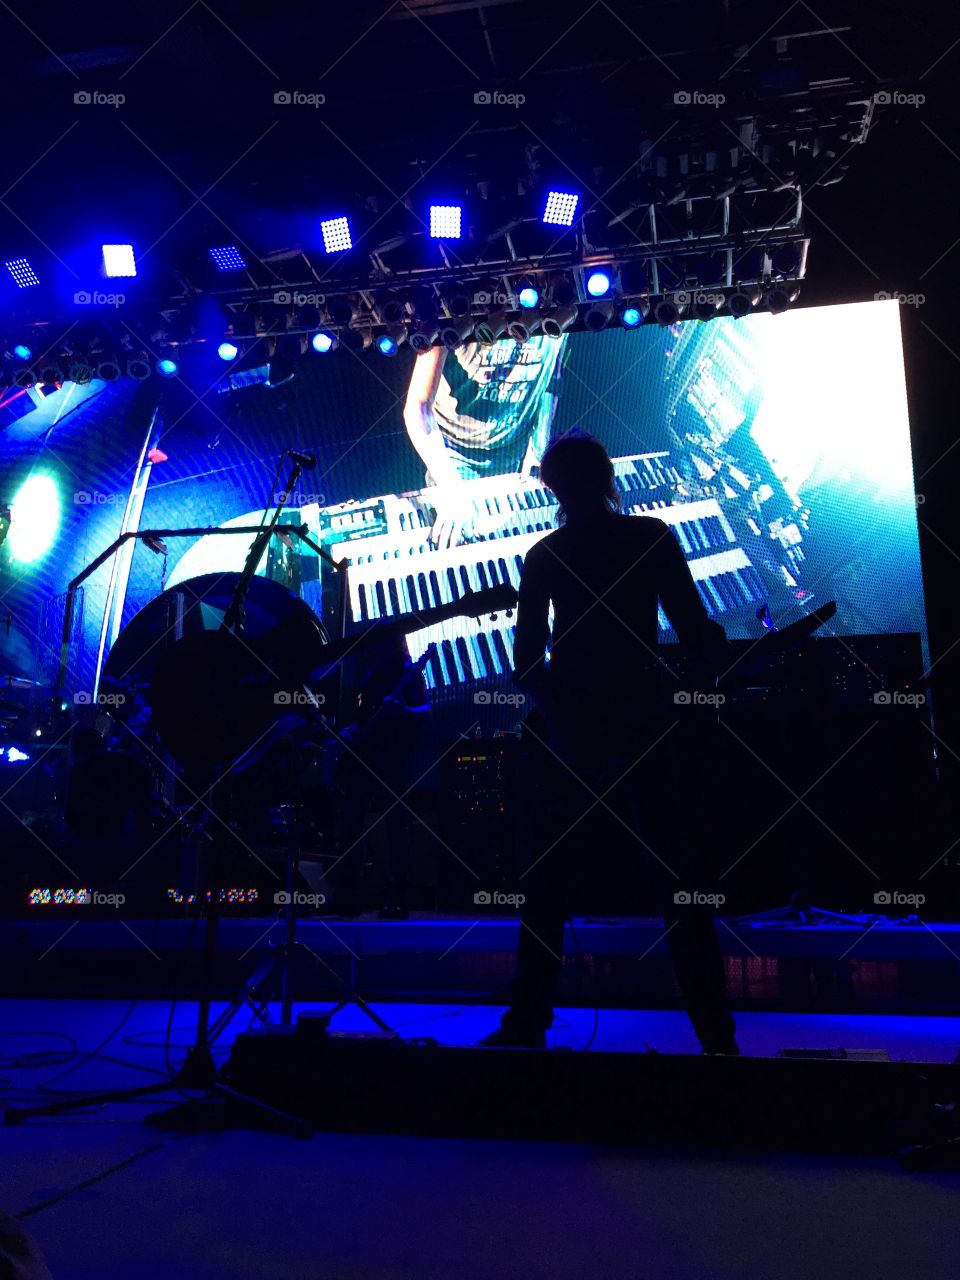 Boston guitarist Tom Scholz on stage, performing a keyboard solo against a video backdrop at the Saint Augustine amphitheater in Florida May 24, 2015